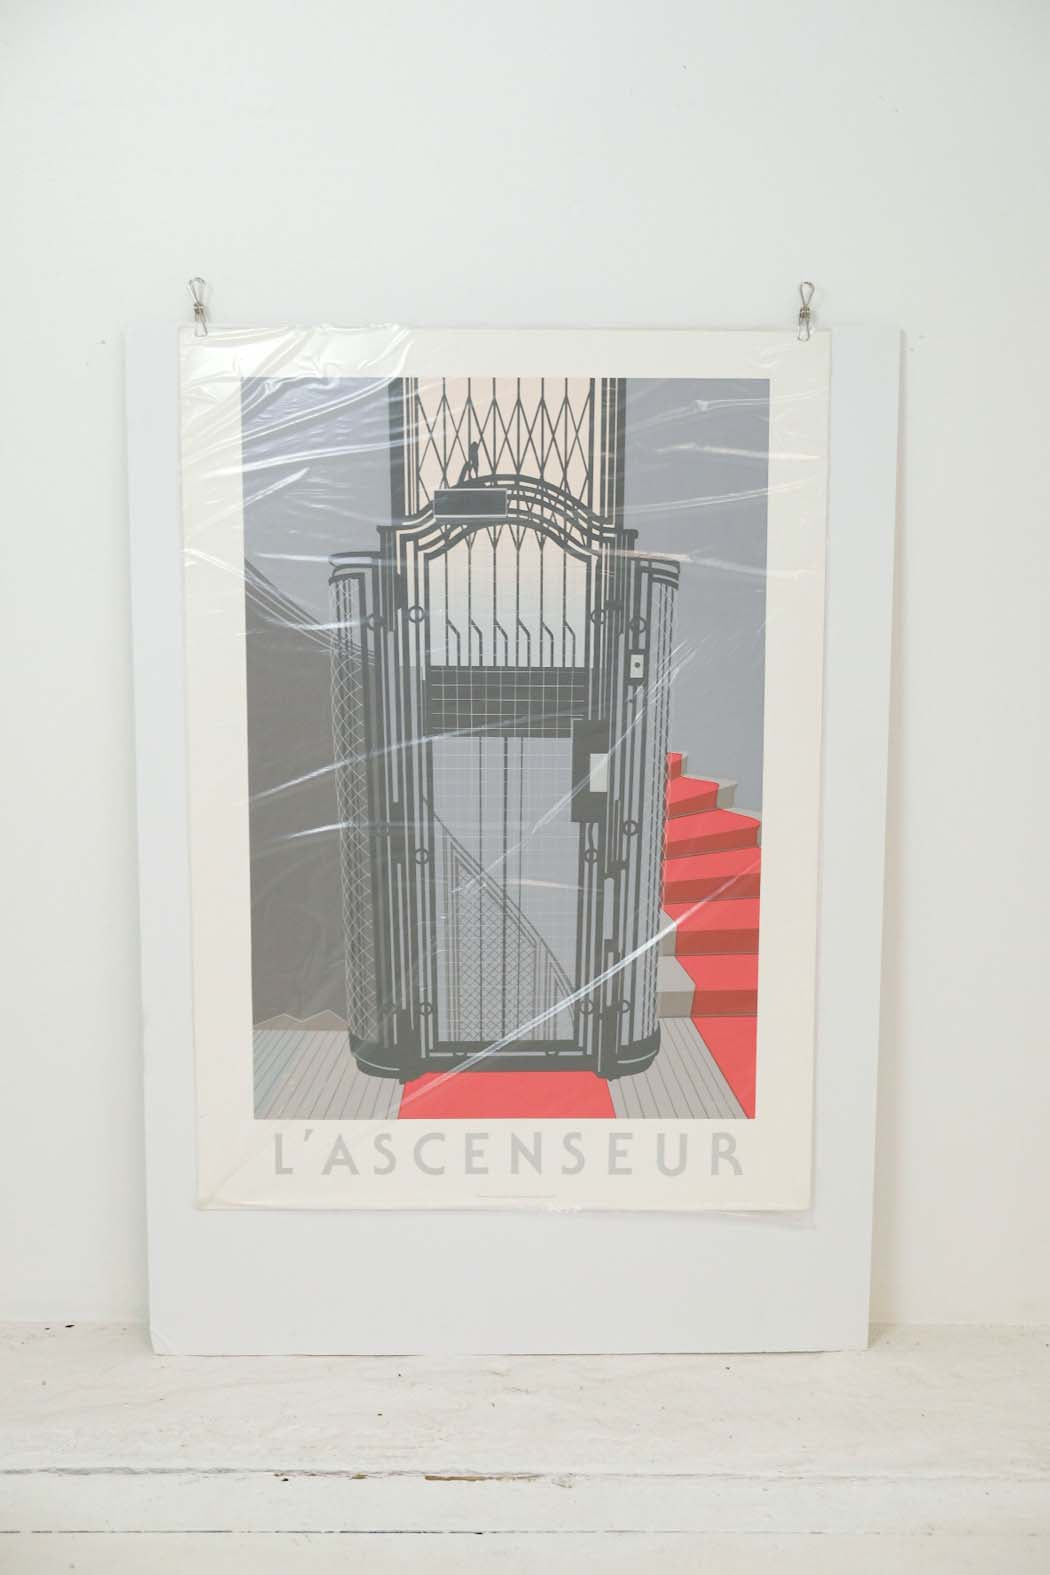 L'ascenseur by Perry King Print